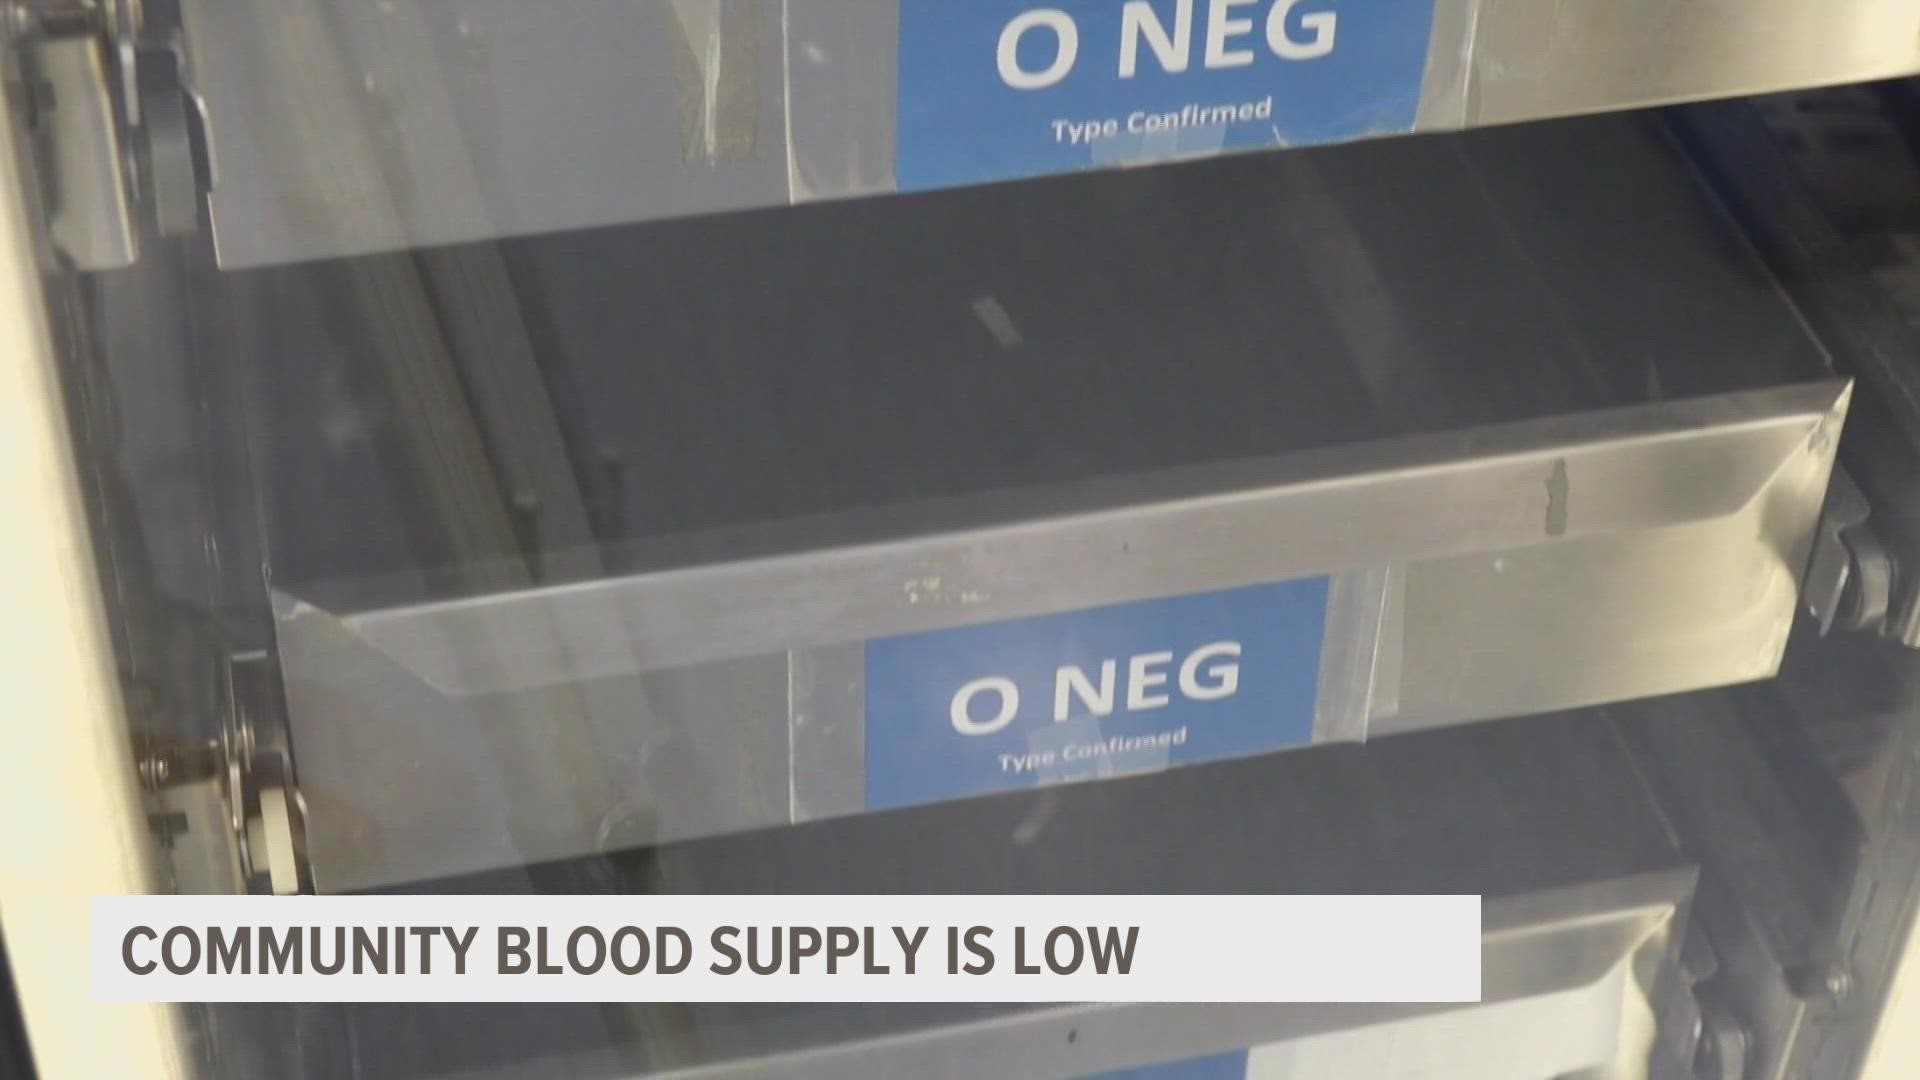 The blood bank says it hasn't been able to hold its typical blood drives due to the pandemic.